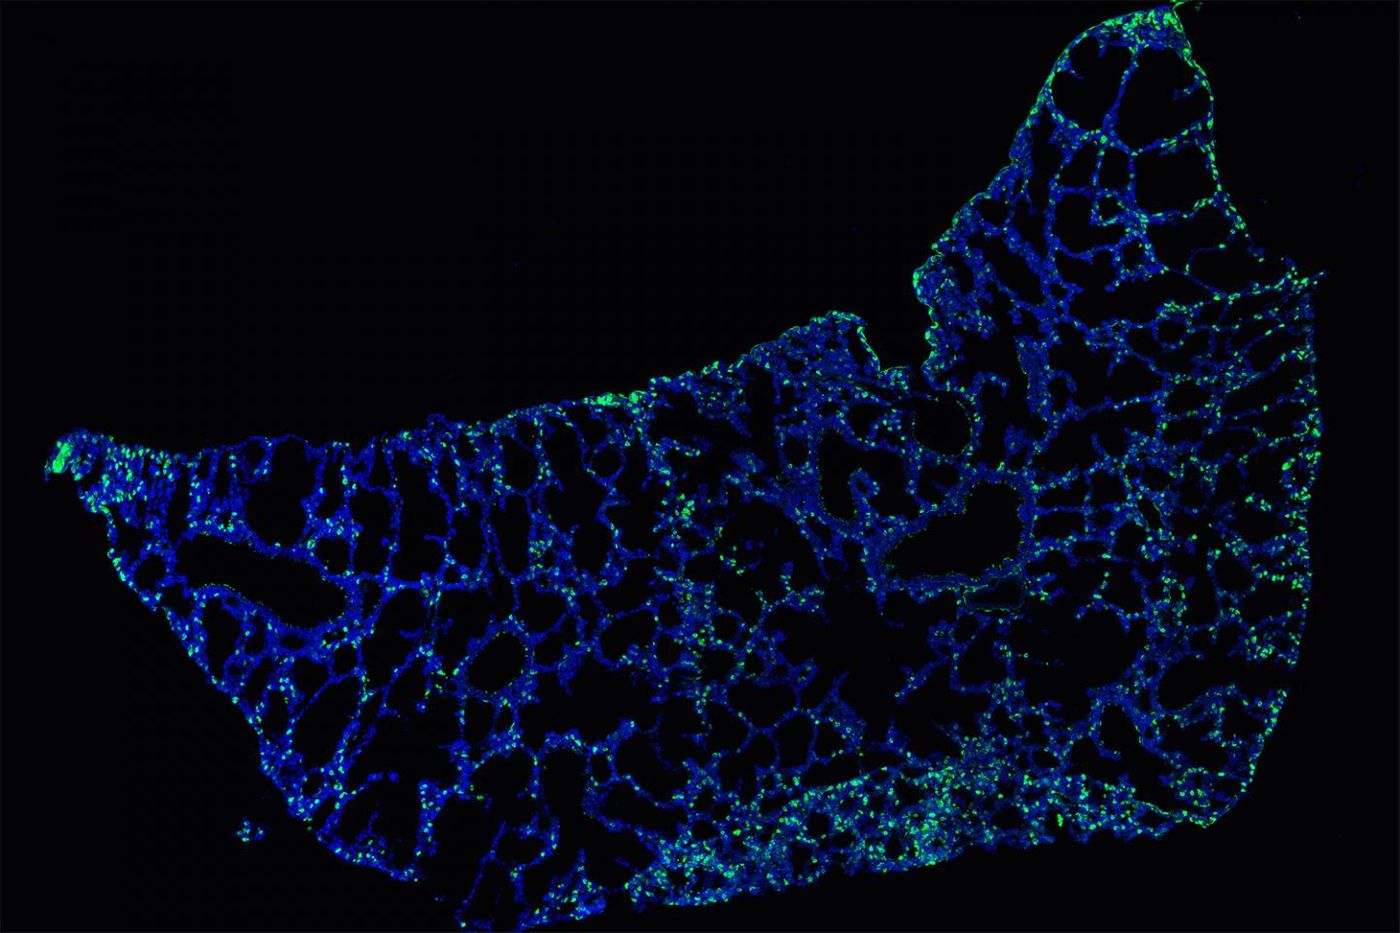 Fluorescent staining of IL-33 in a newborn mouse lung. Source: Seth Scanlon / MRC Laboratory of Molecular Biology, Cambridge